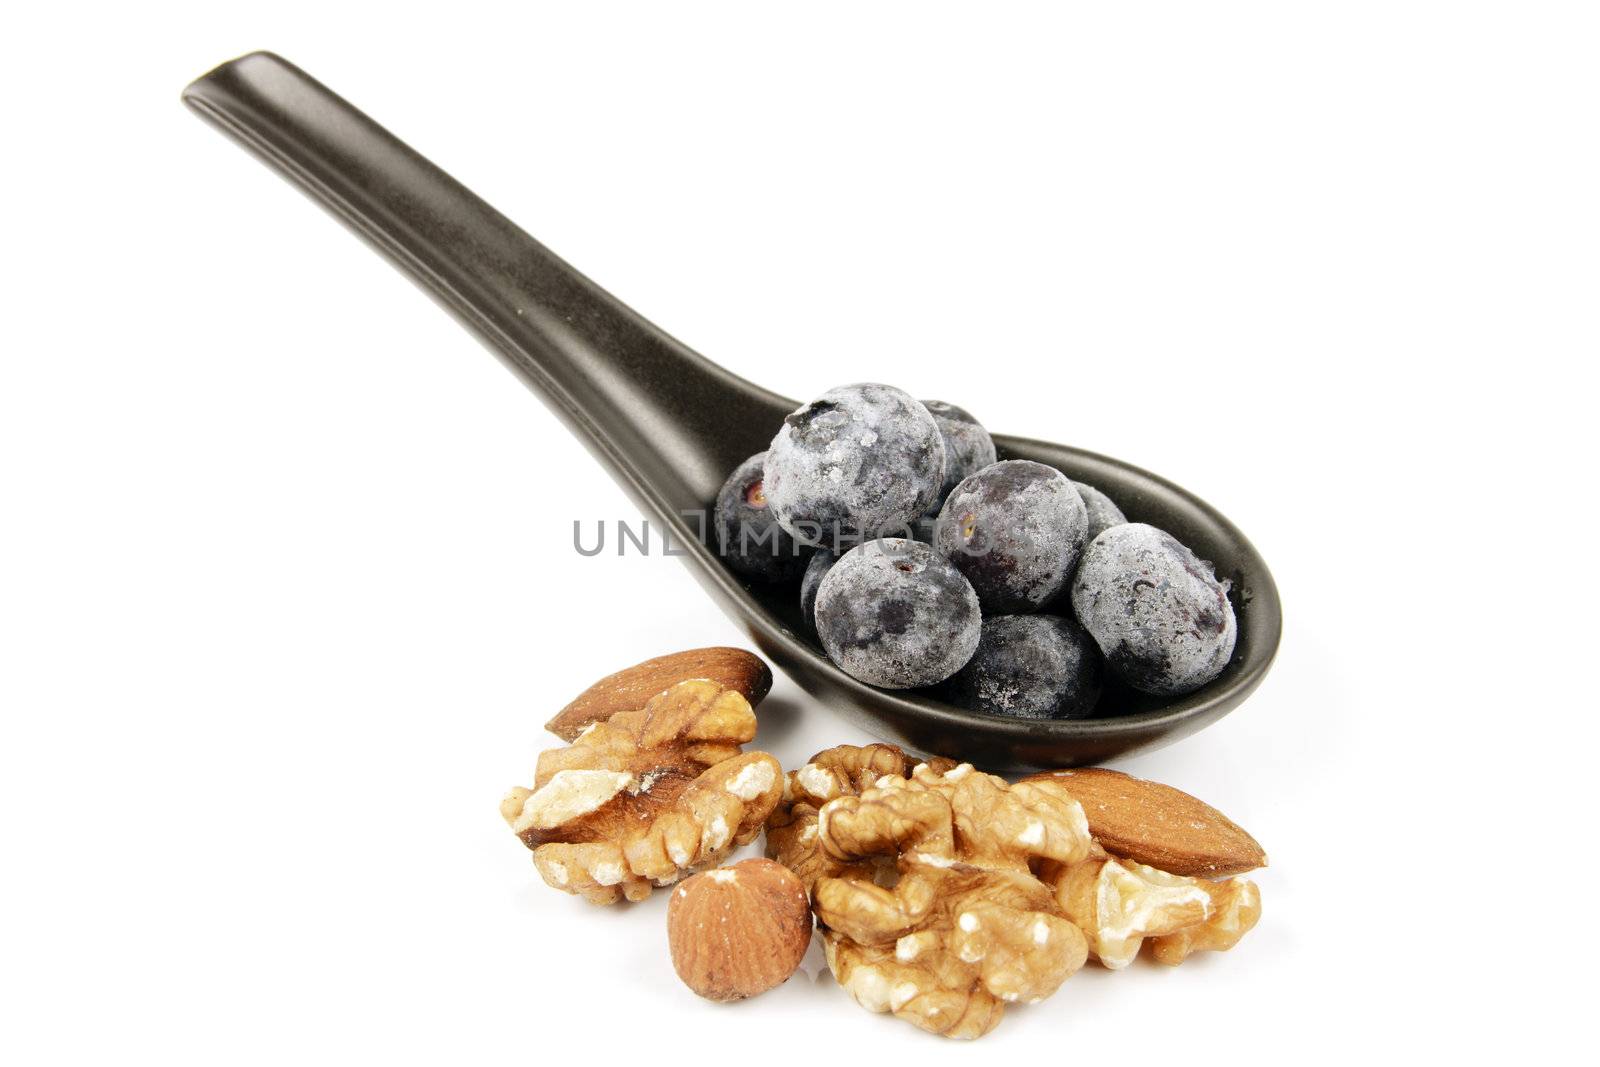 Blue ripe blueberries on a small black spoon with mixed nuts on a reflective white background